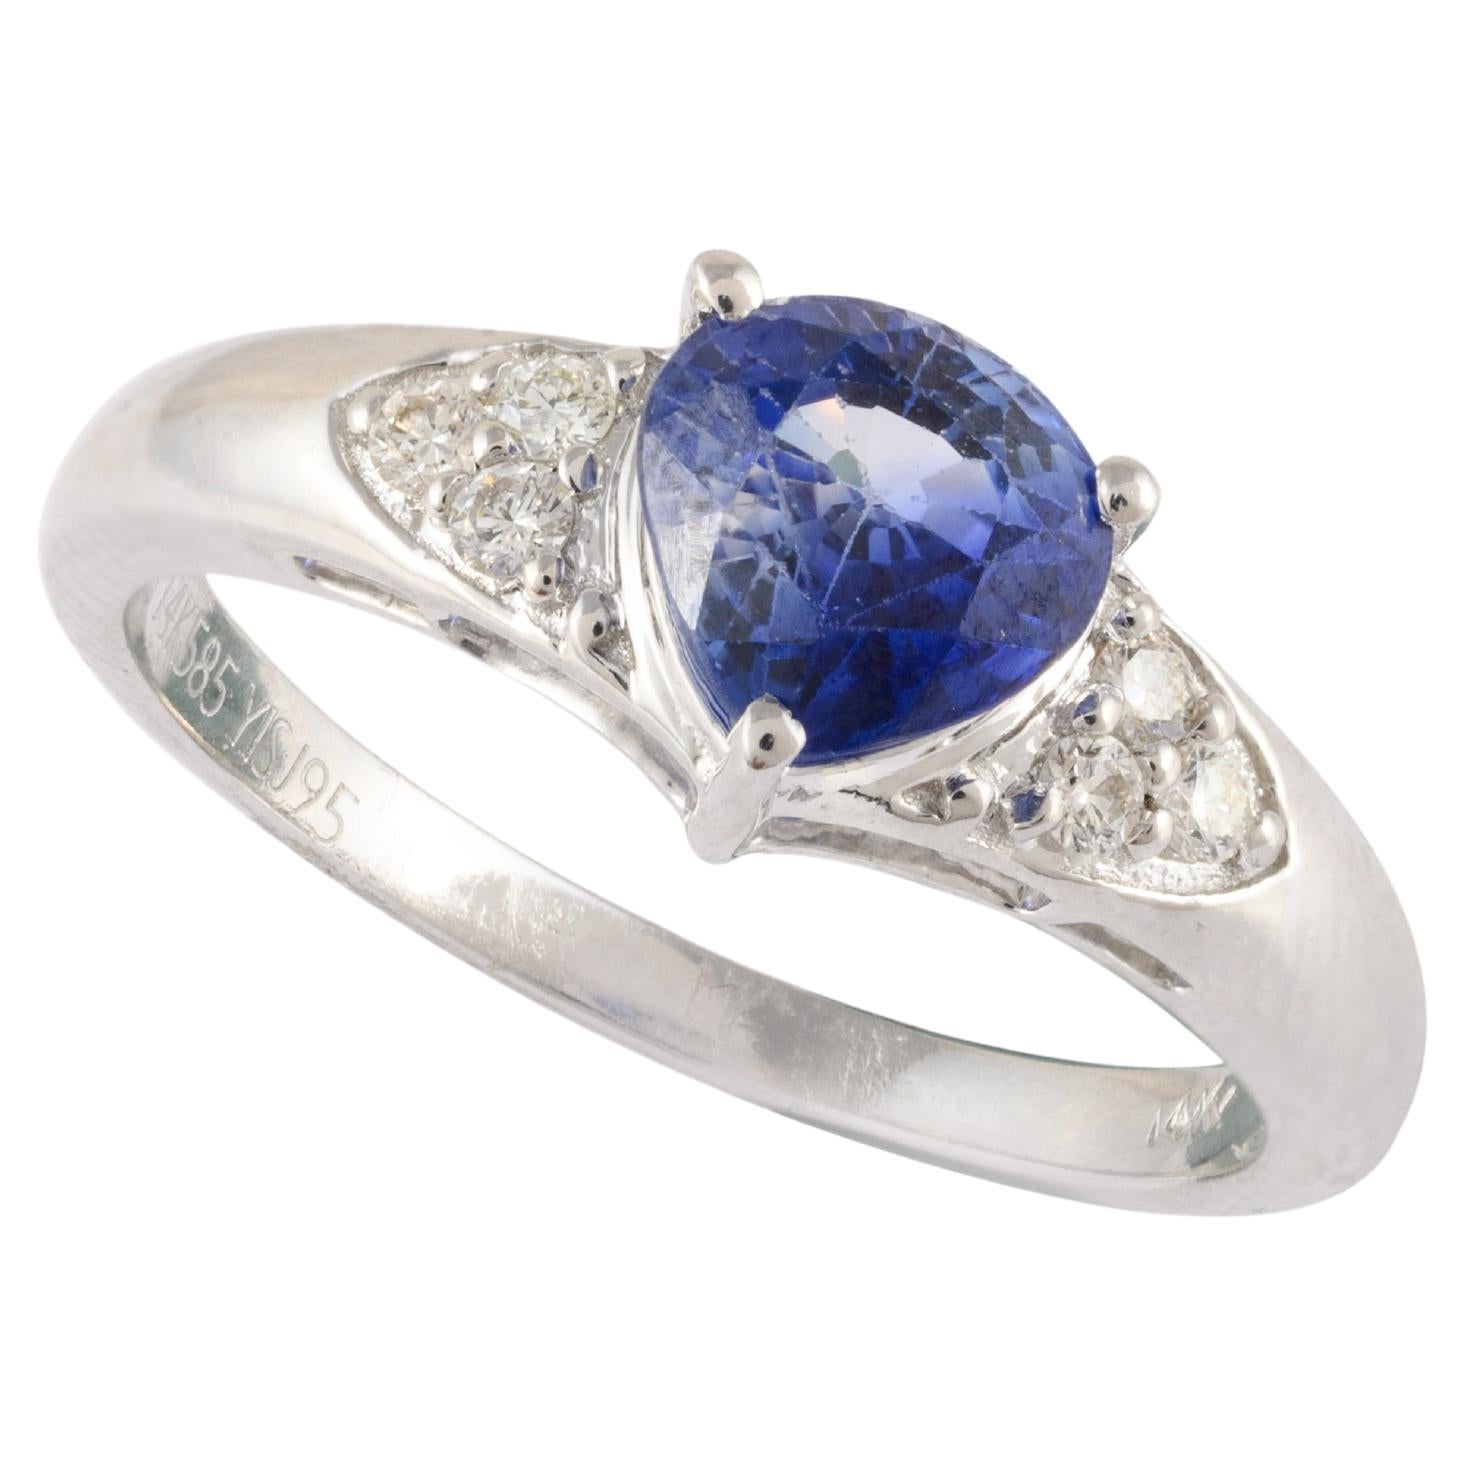 14k White Gold Trillion Cut Sapphire Birthstone Engagement Ring with Diamonds